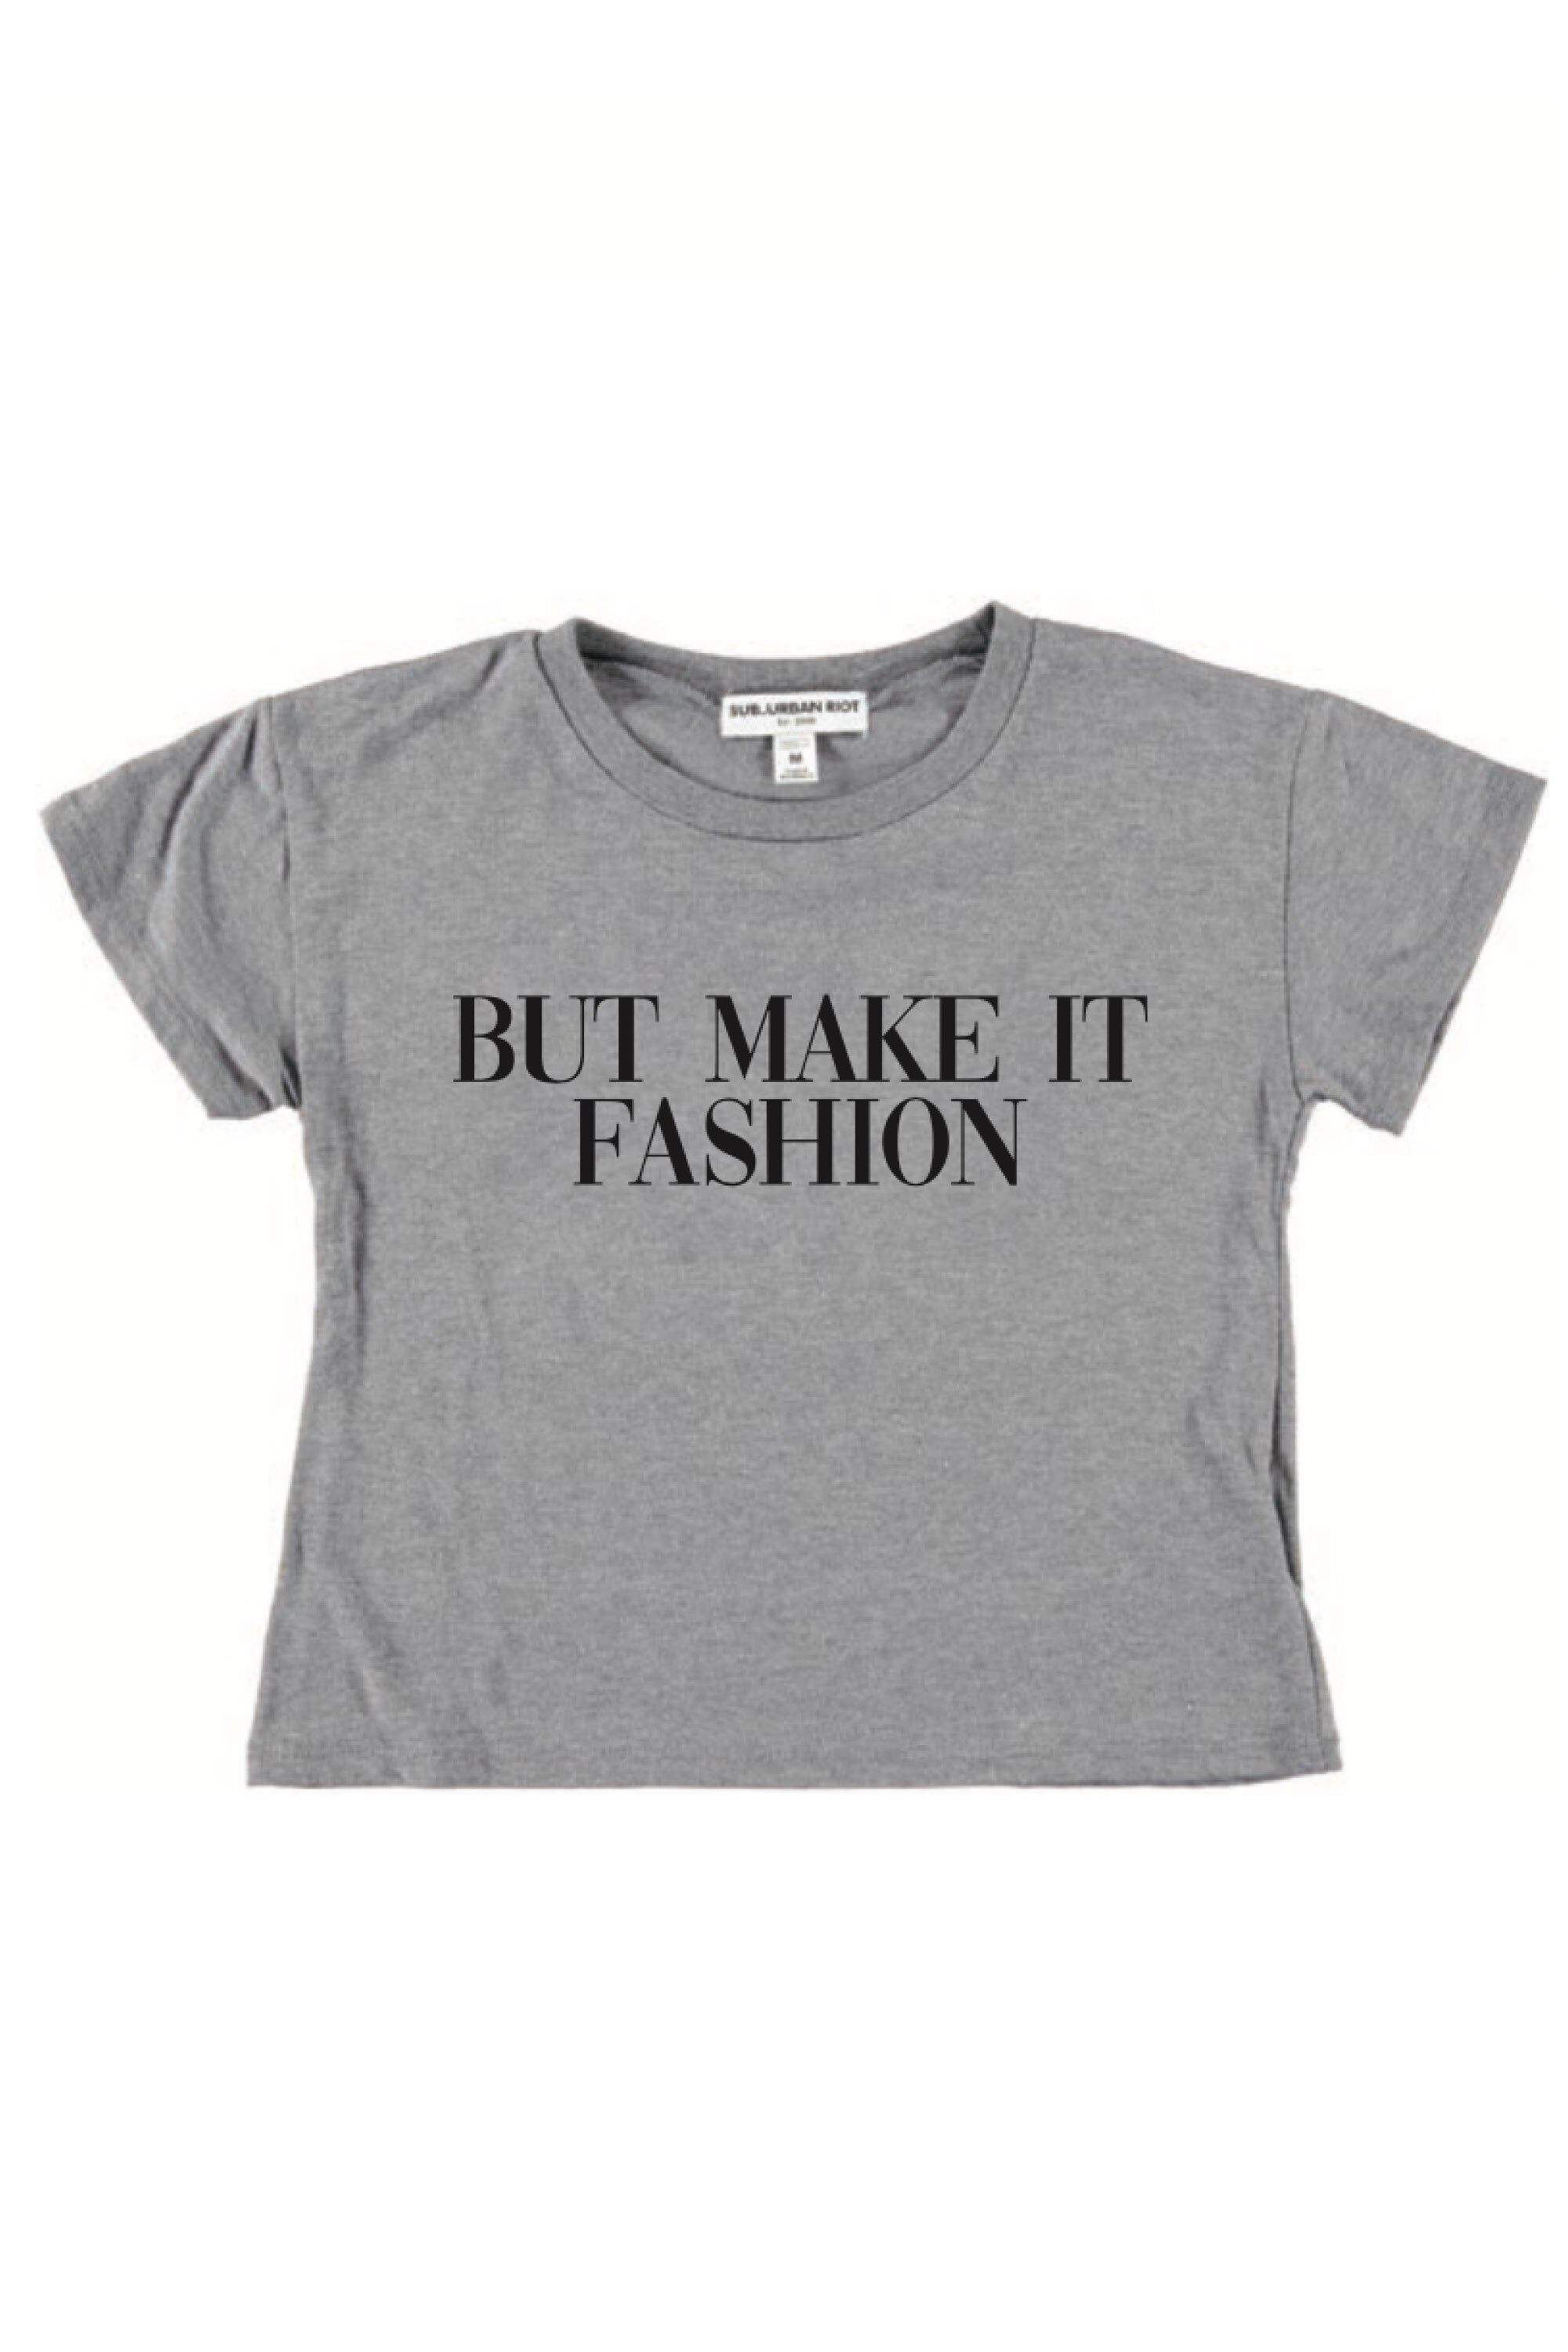 BUT MAKE IT FASHION YOUTH SIZE CROP TEE